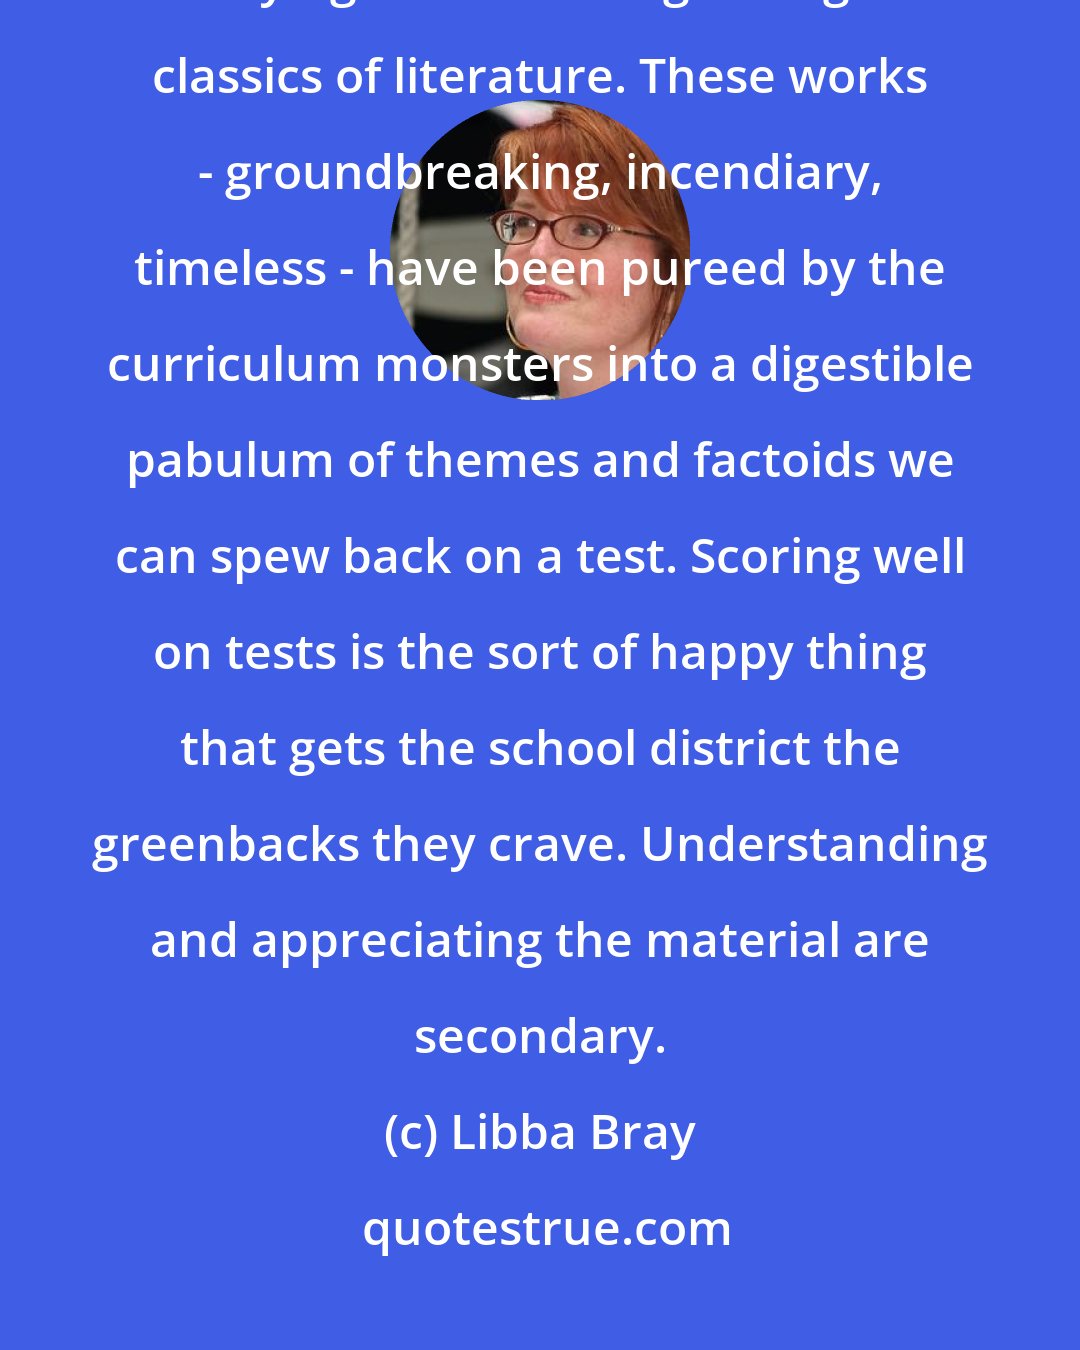 Libba Bray: We're in English class, which for most of us is an excruciating exercise in staying awake through the great classics of literature. These works - groundbreaking, incendiary, timeless - have been pureed by the curriculum monsters into a digestible pabulum of themes and factoids we can spew back on a test. Scoring well on tests is the sort of happy thing that gets the school district the greenbacks they crave. Understanding and appreciating the material are secondary.